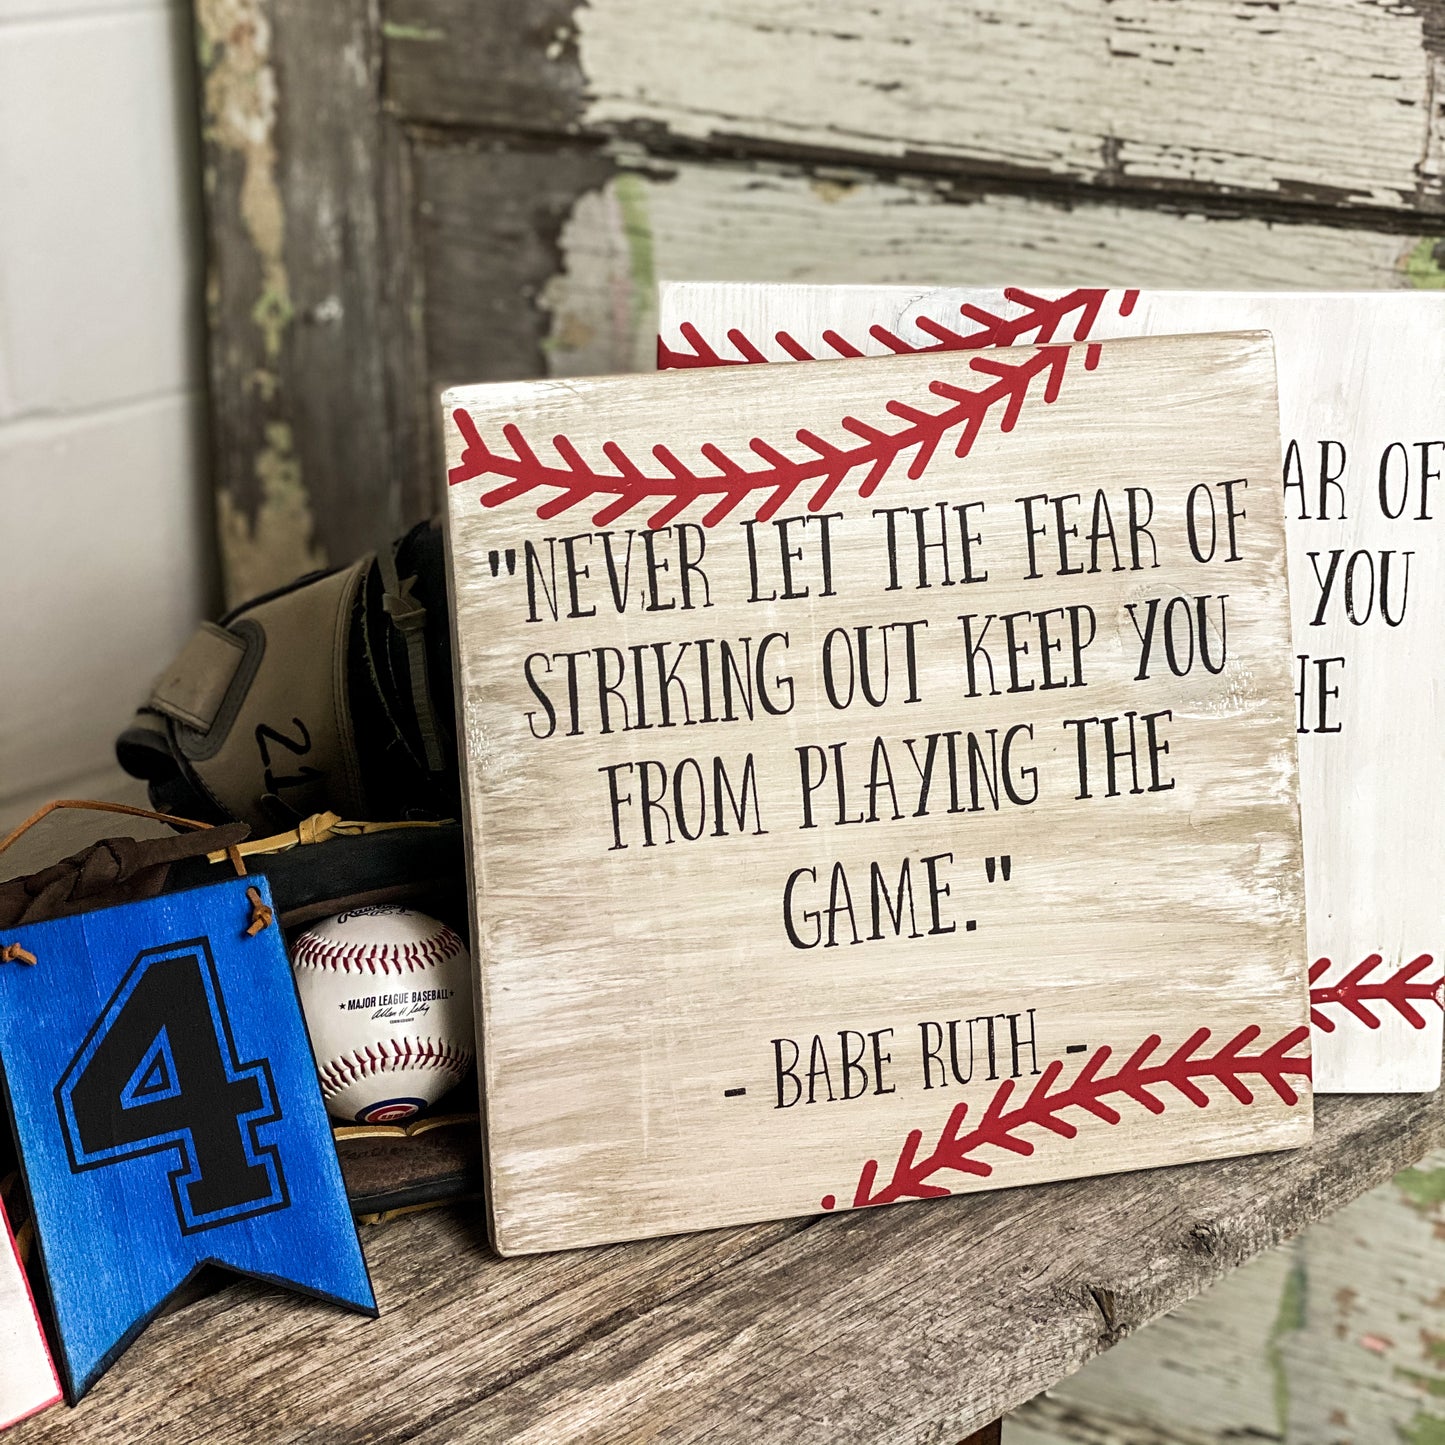 Striking Out - Babe Ruth quote sign